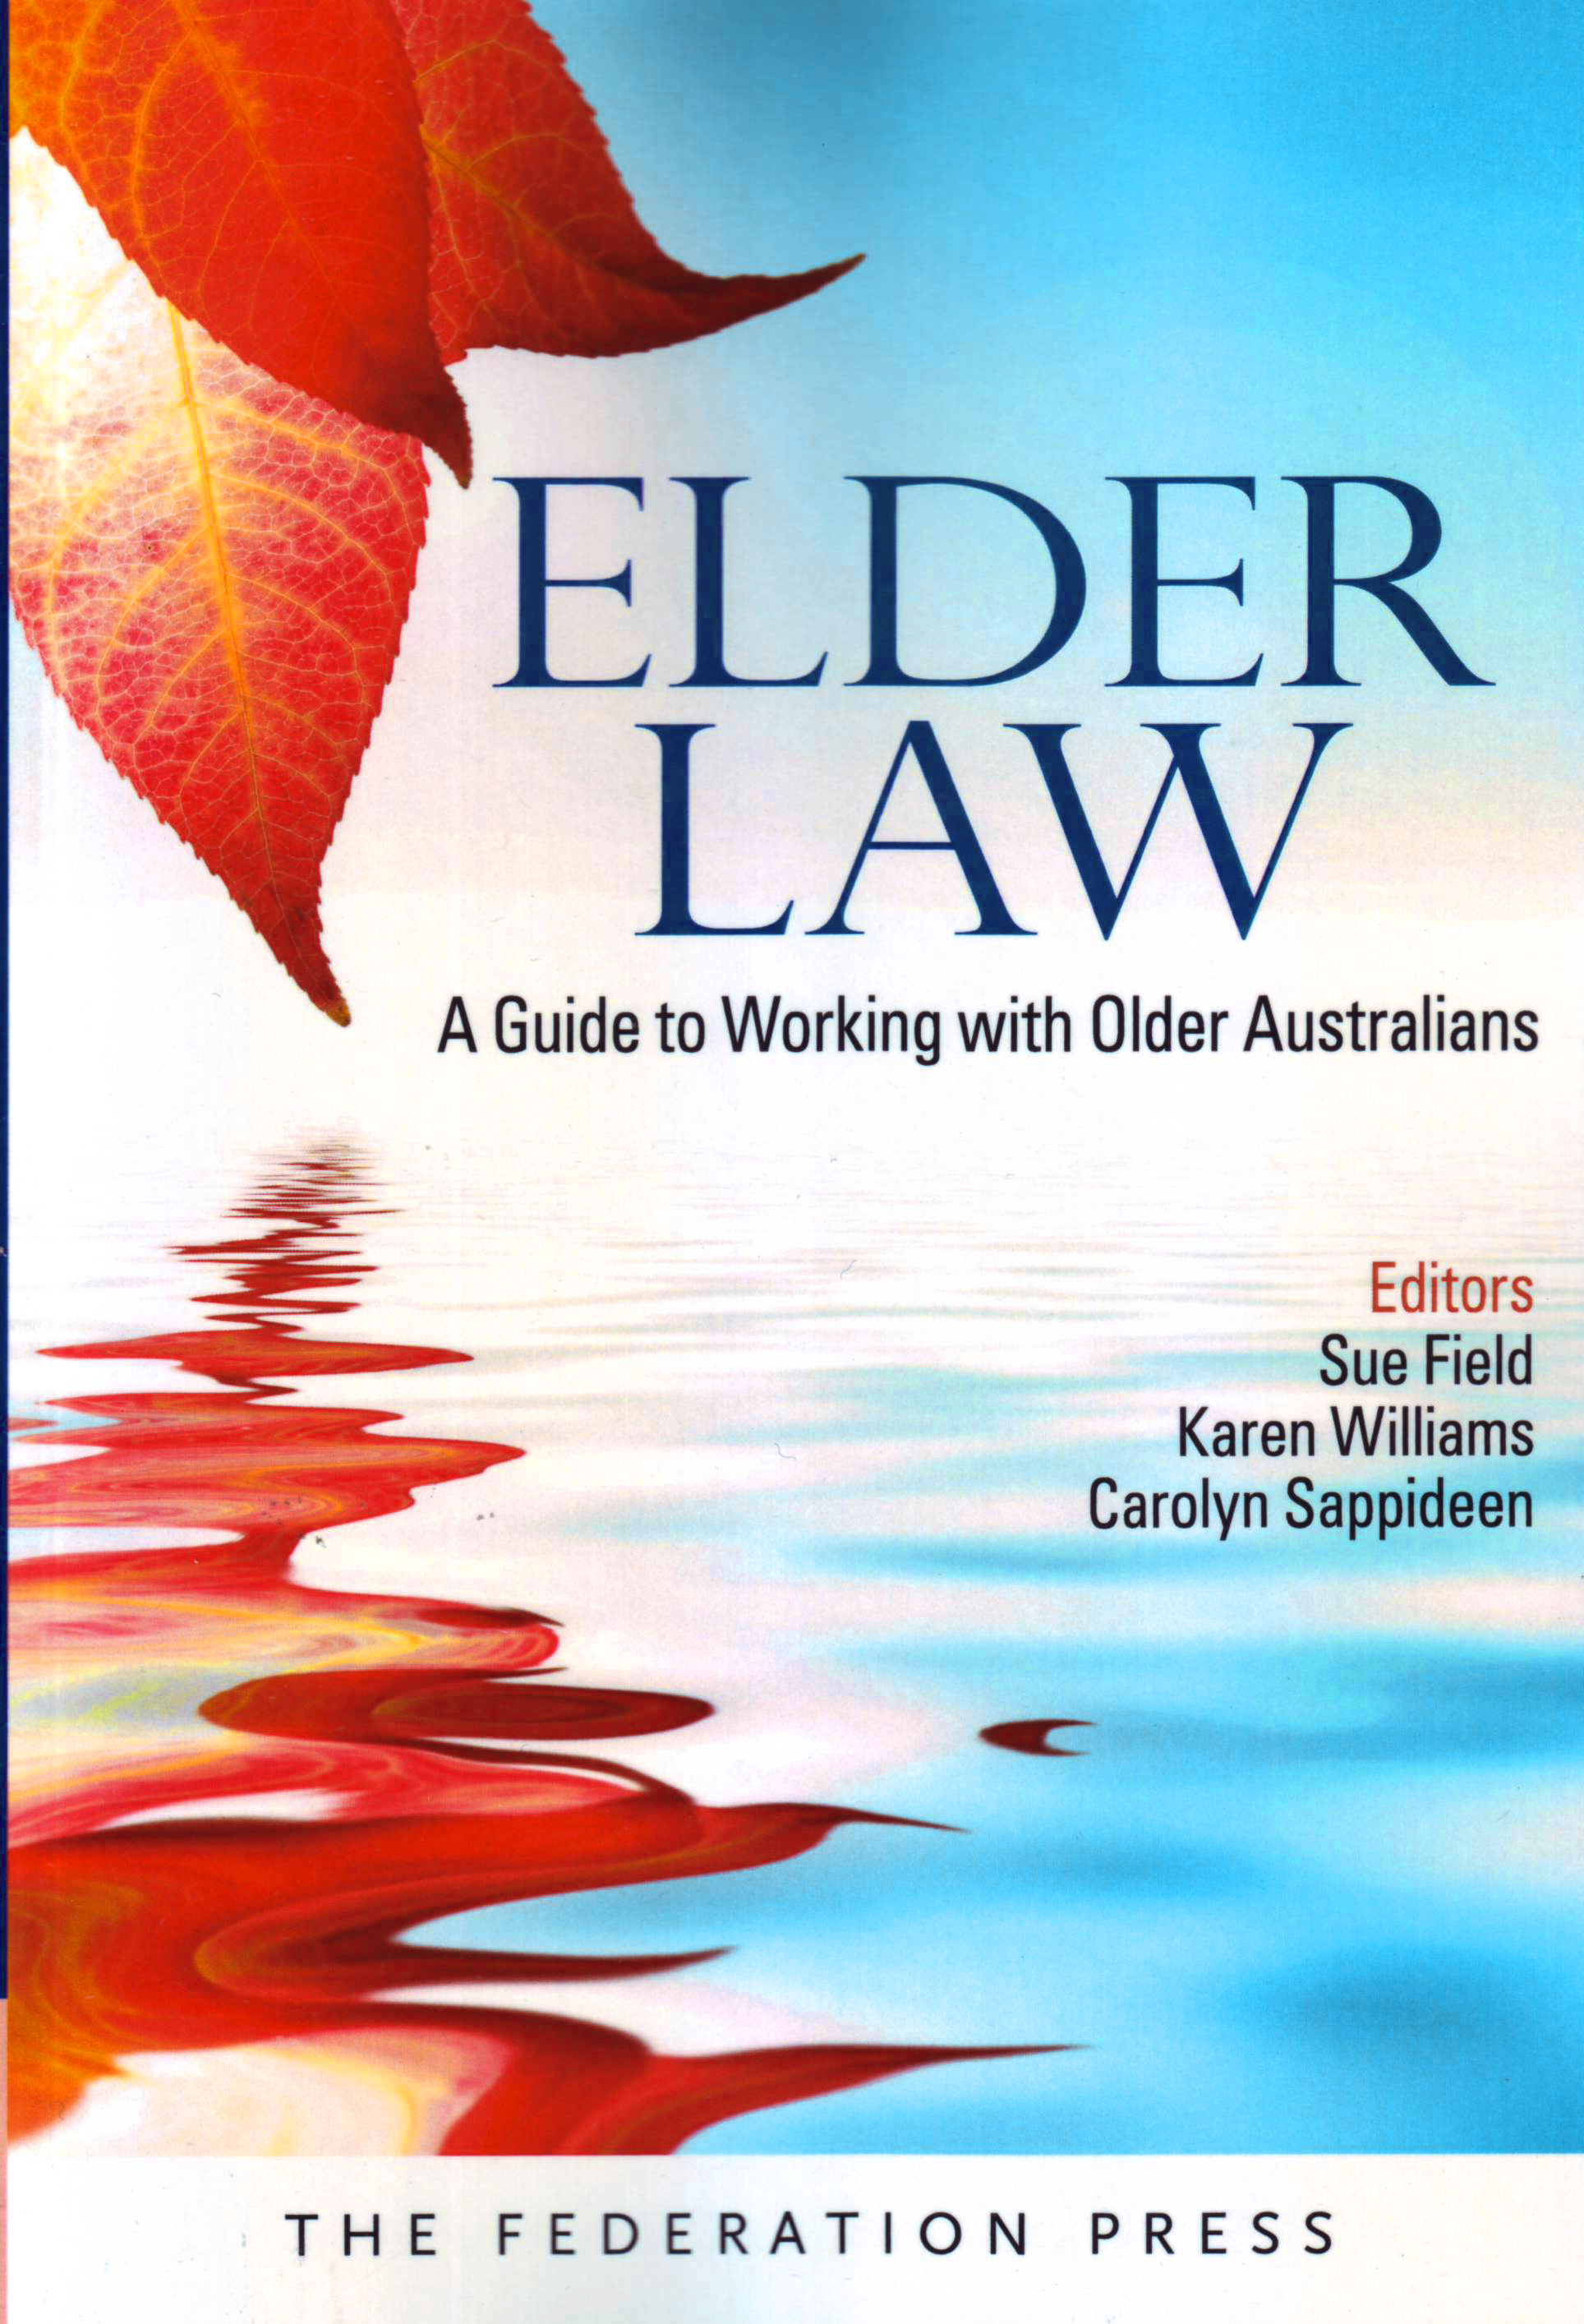 Elder Law: A Guide to Working with Older Australians